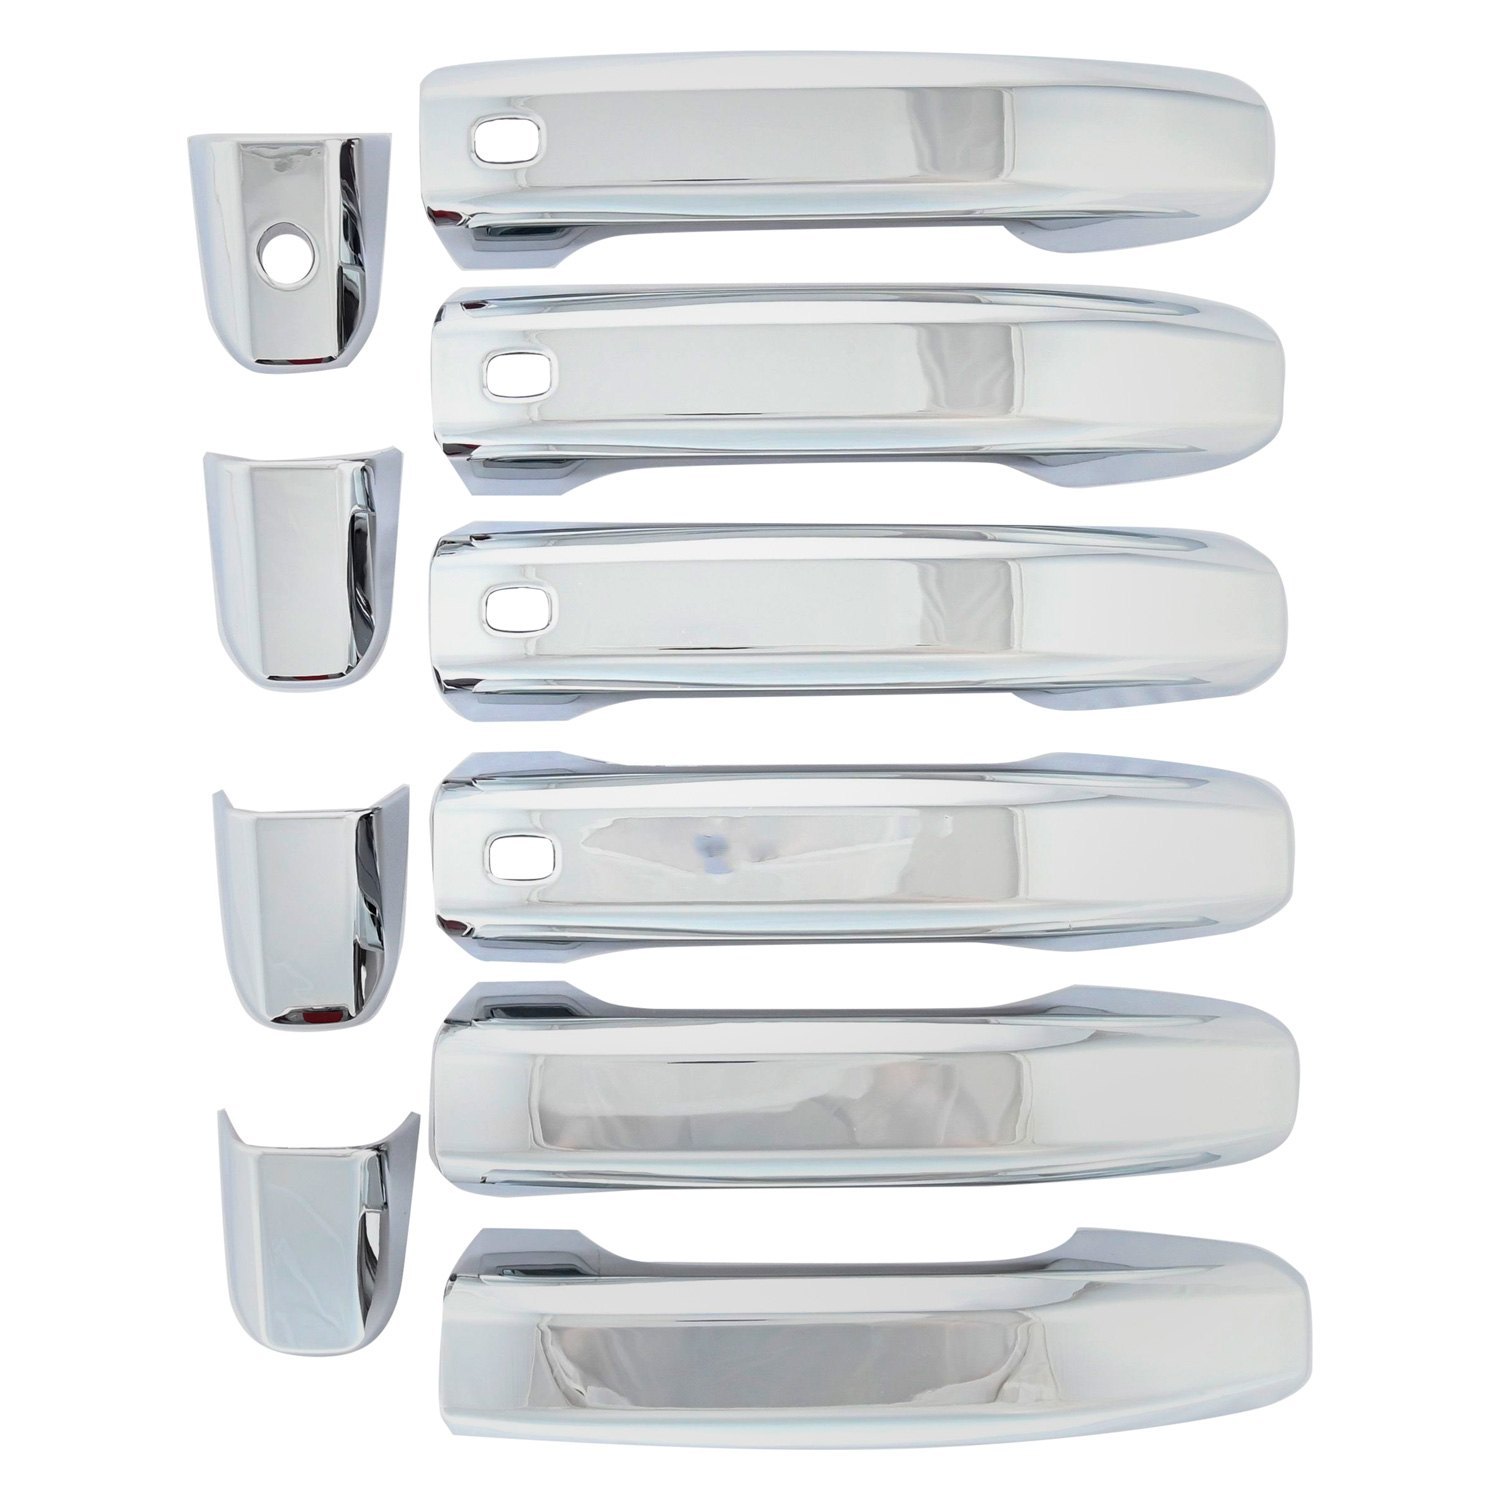 2019-2024 Trim-Illusion Patented Snap-On Chrome Door Handle Cover